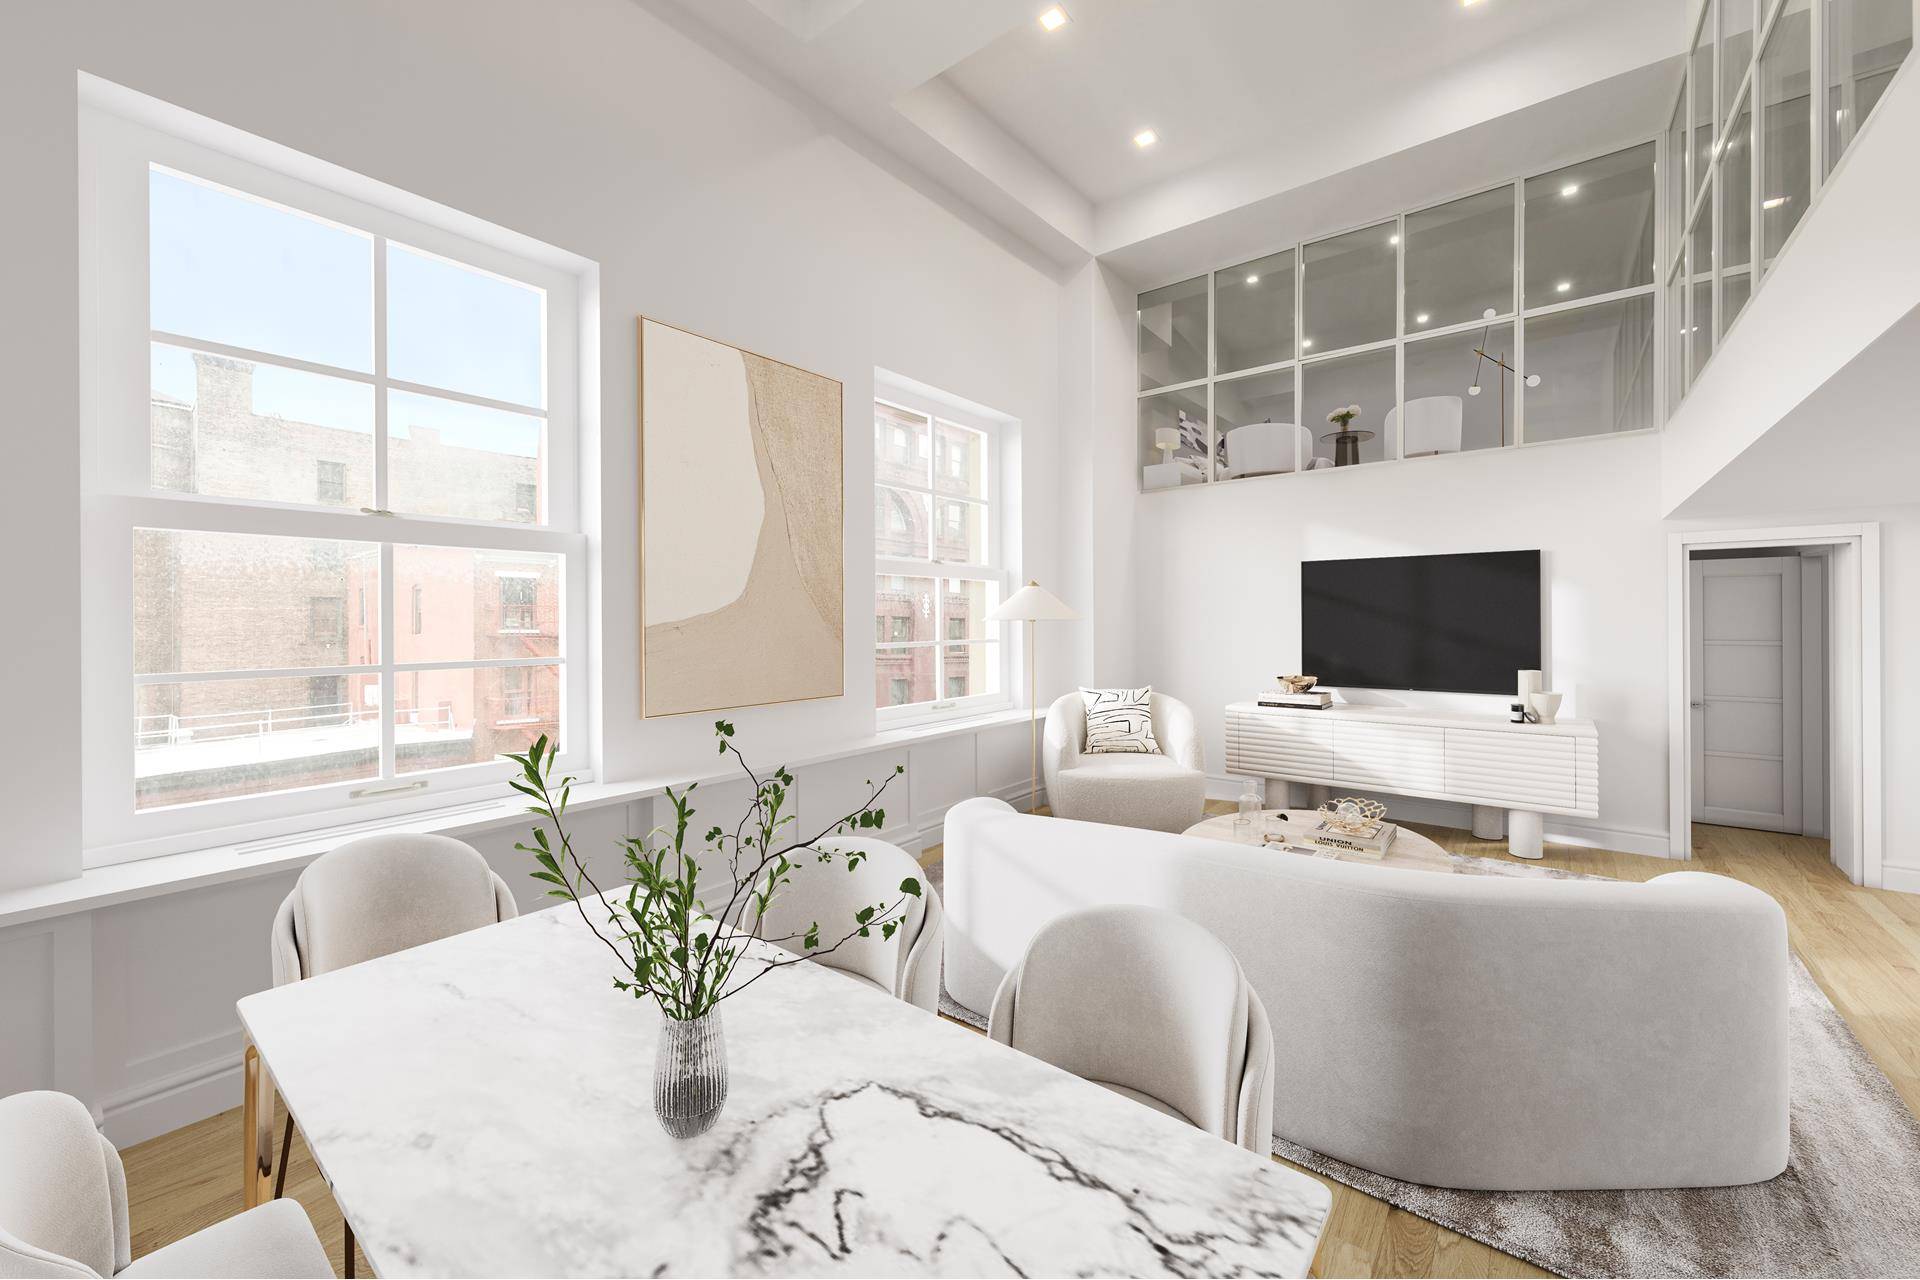 DRAMATIC amp ; SOPHISTICATED DUPLEX ULTIMATE NYC LIVING EXPERIENCE 16FT CEILINGS 2 BED 2.